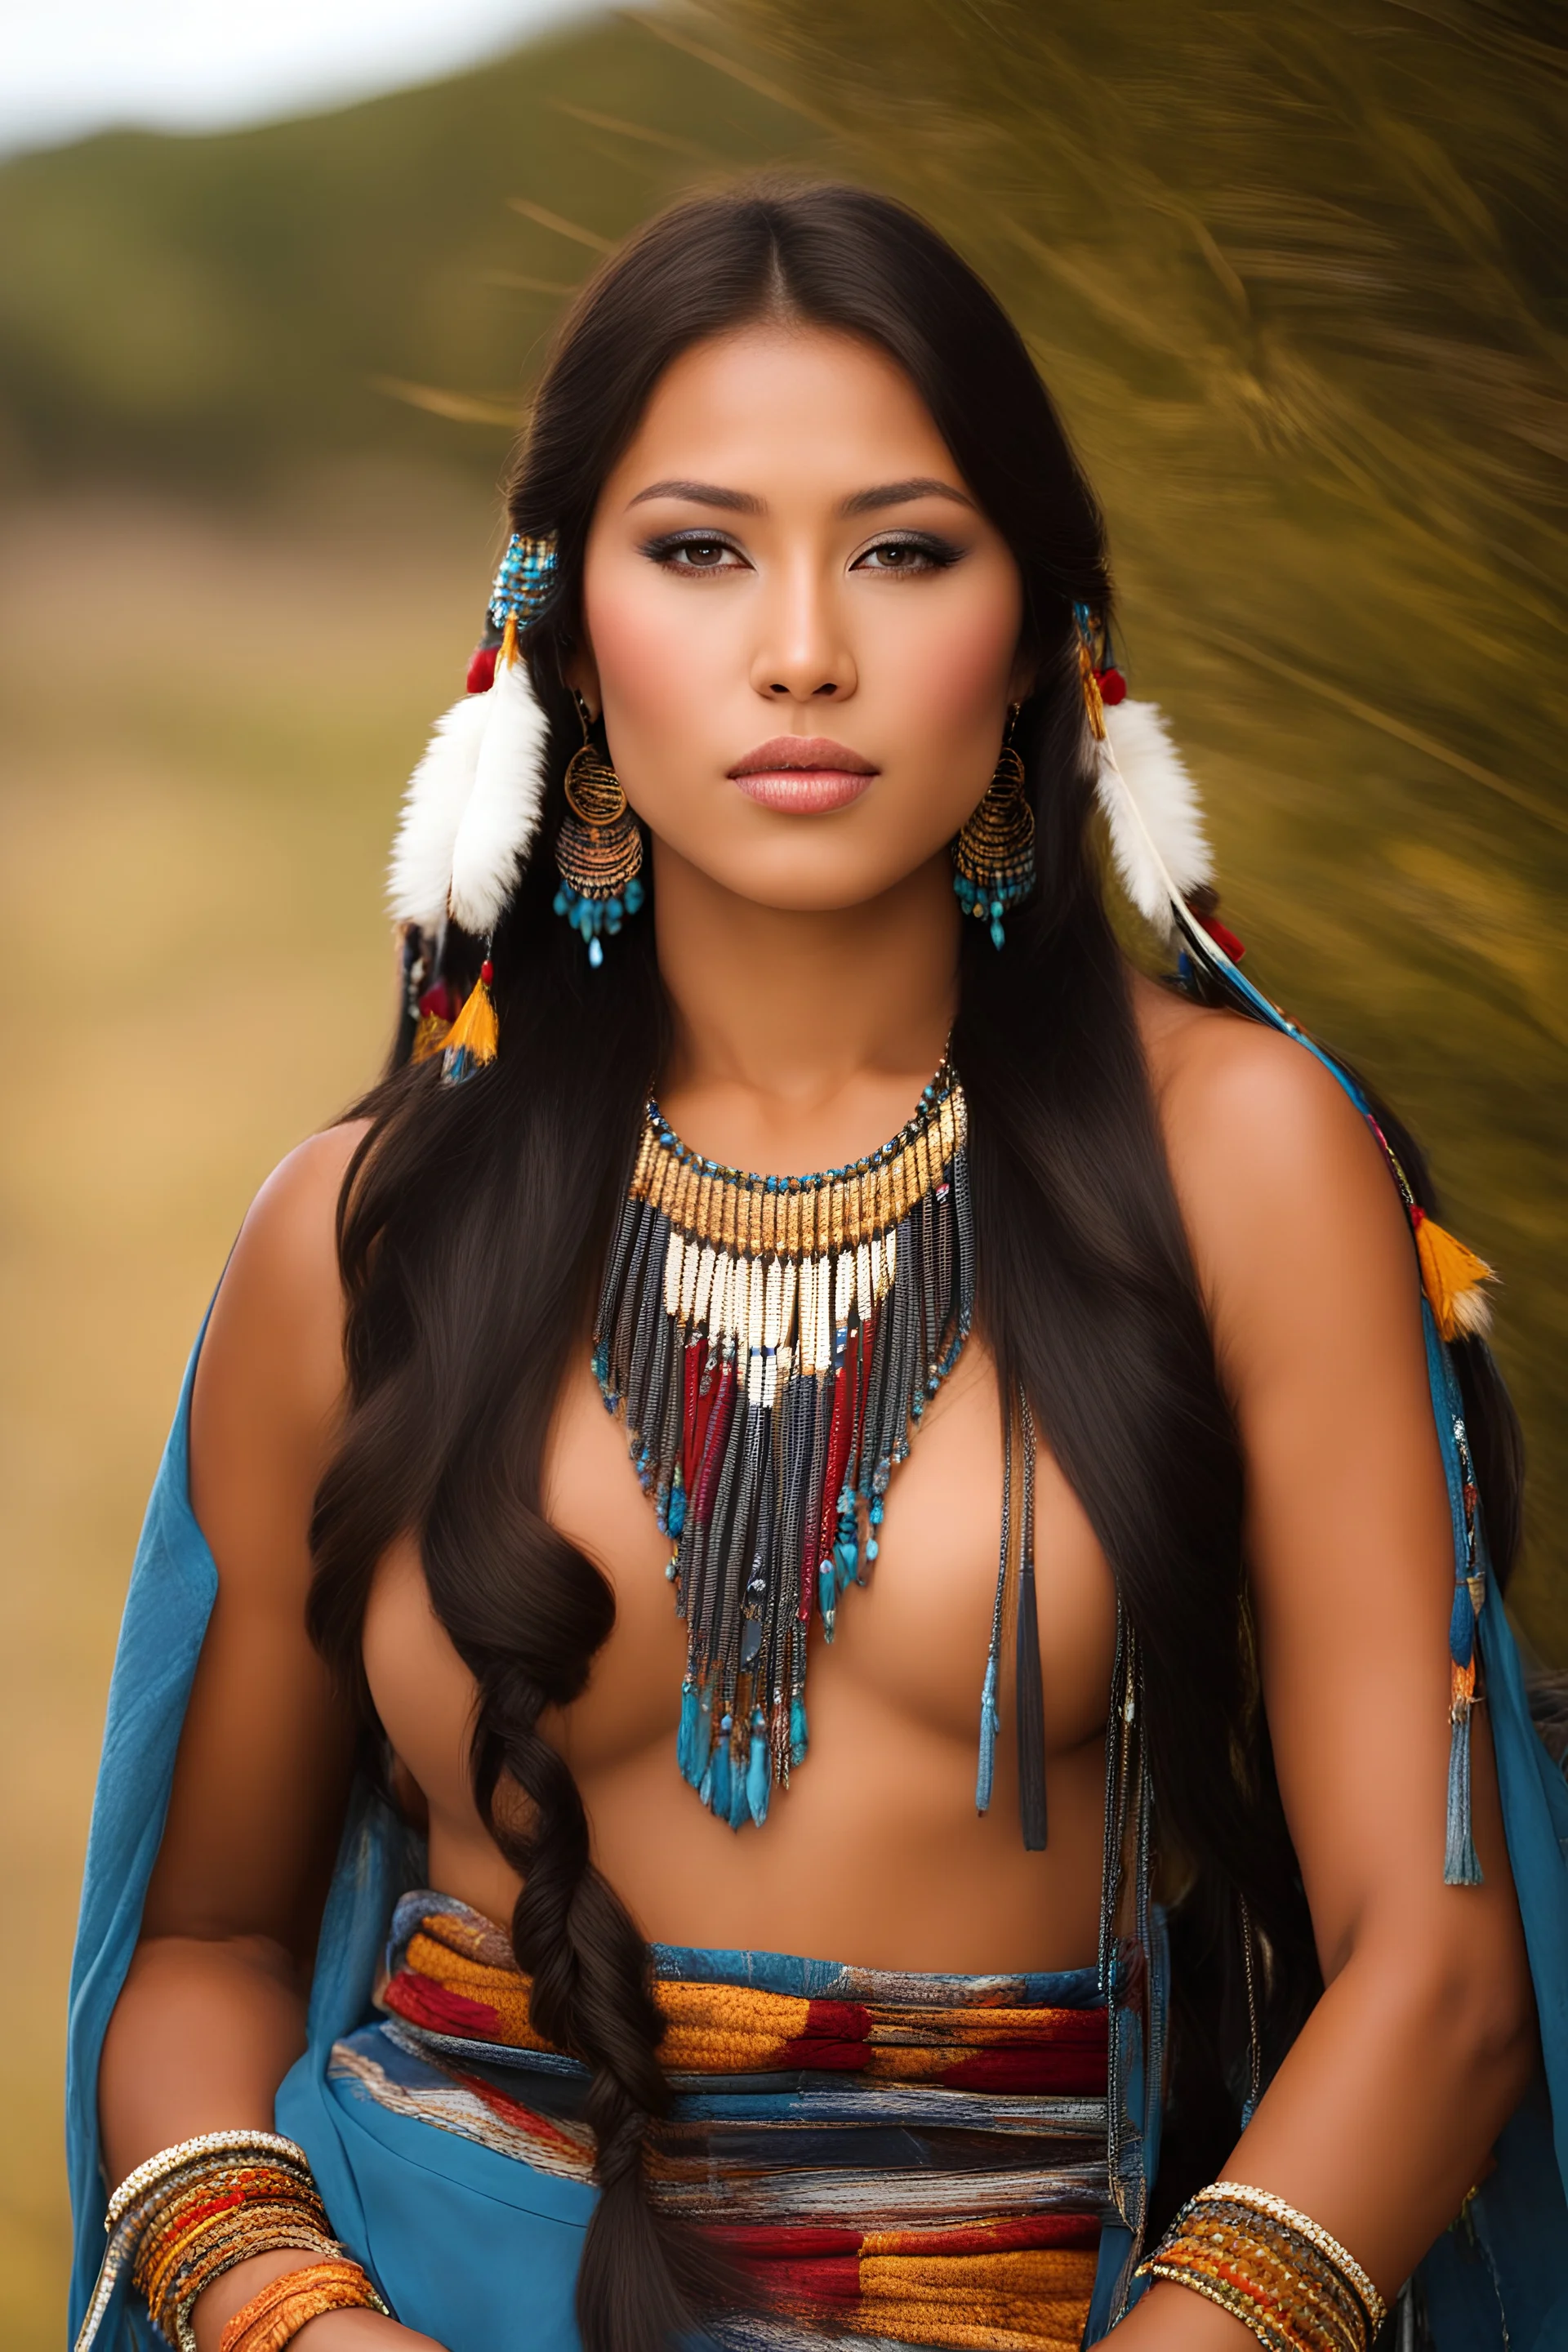 a digital photograph of a gorgeous native american woman, 25 years old